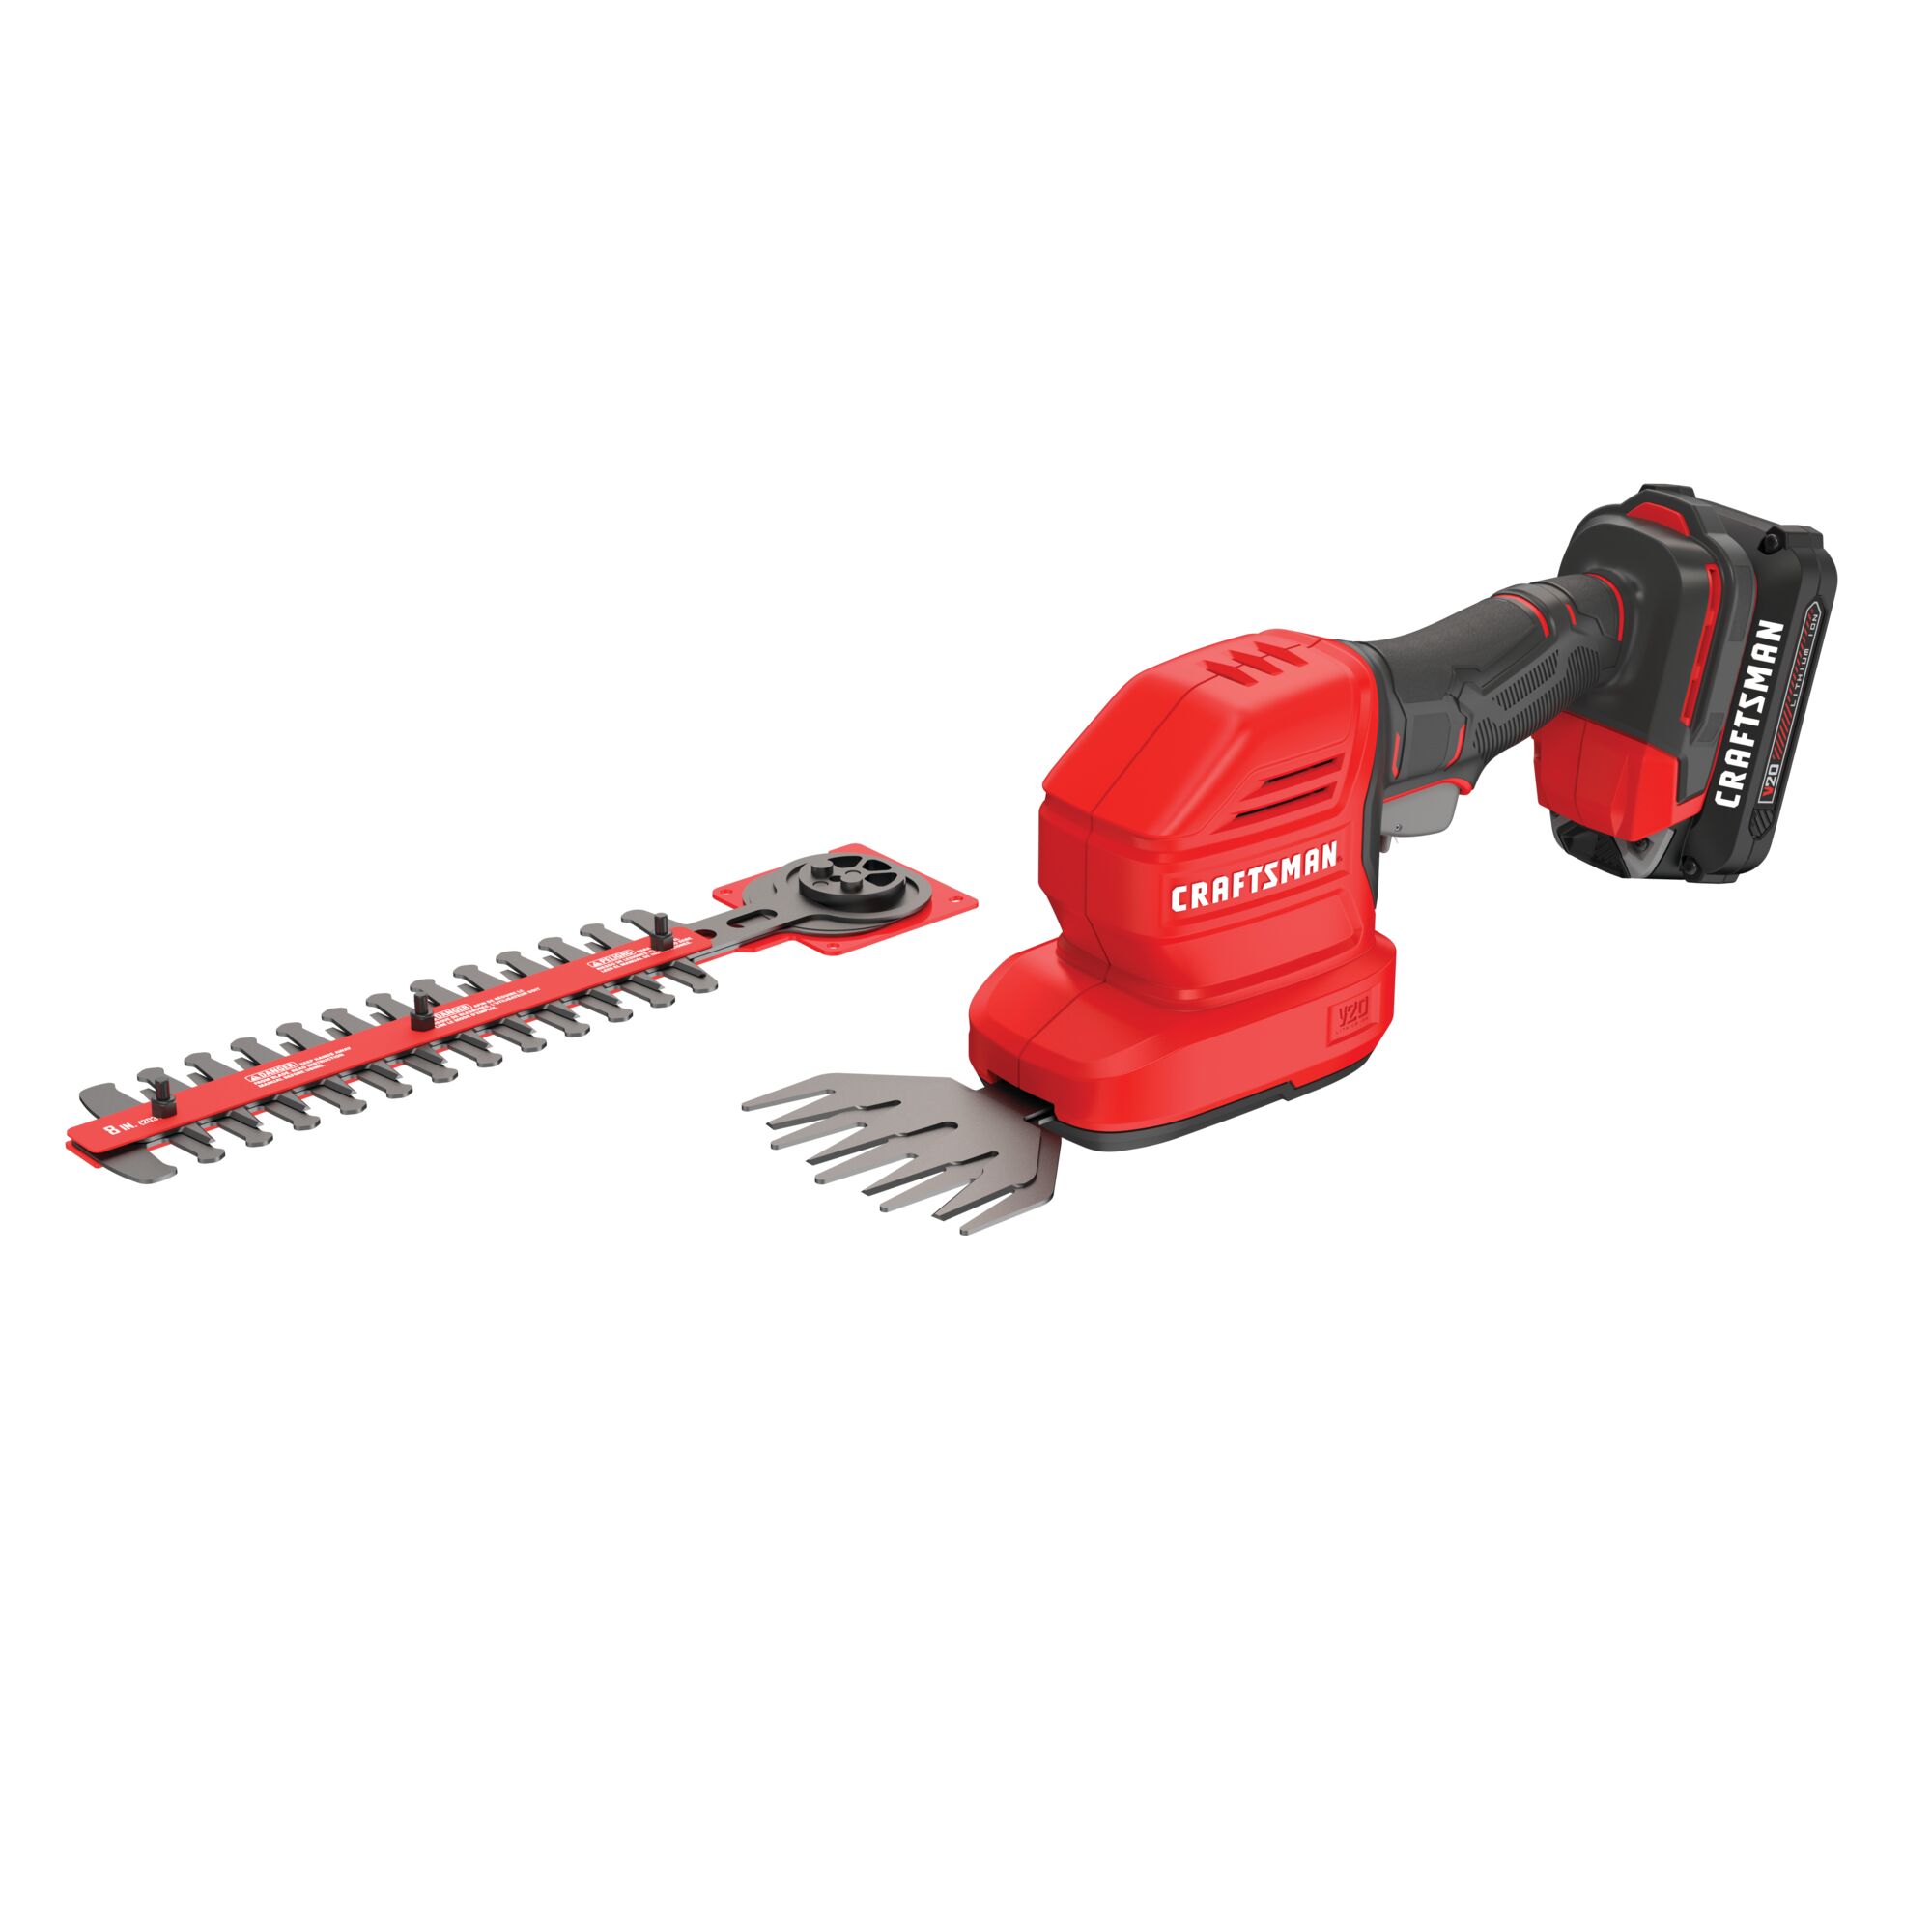 20 volt 8 inch cordless 2 in 1 hedge trimmer and 4 inch grass shear kit.